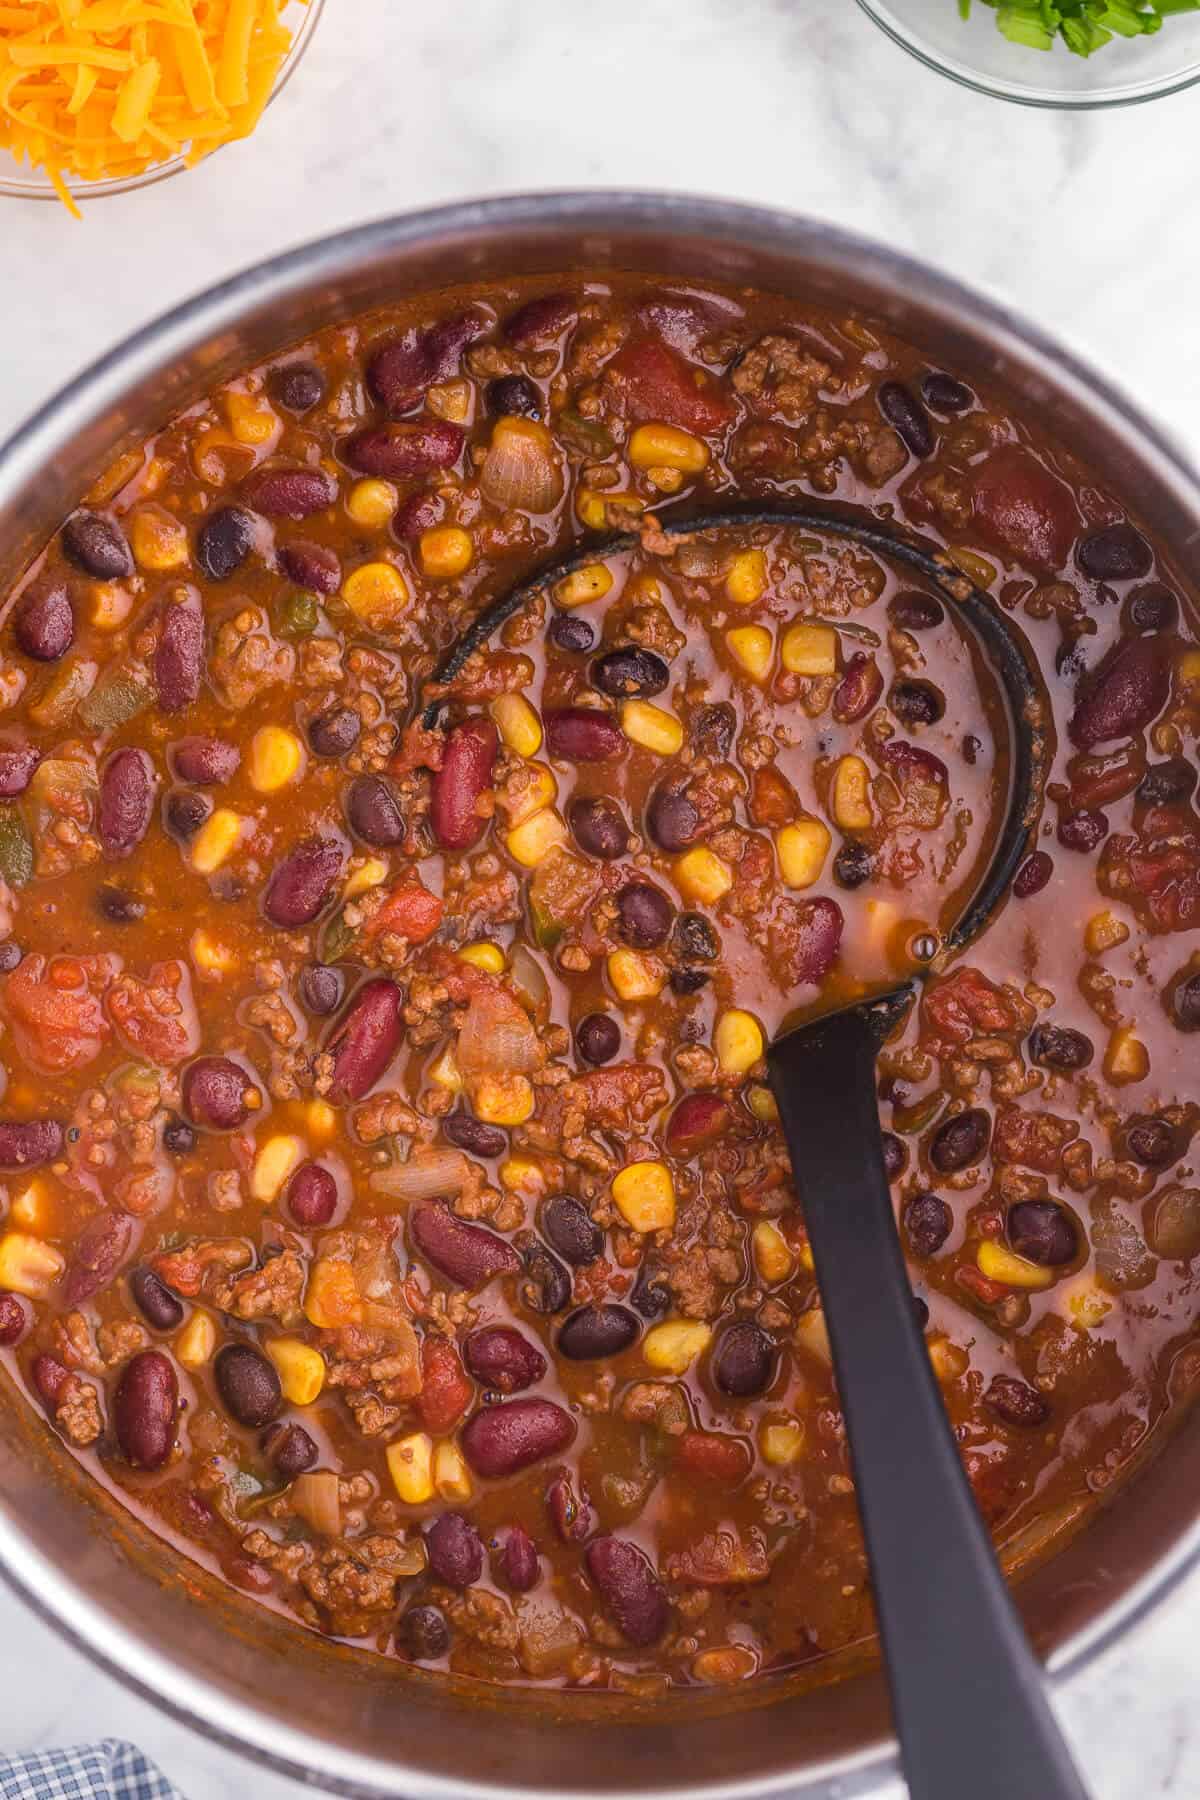 Pantry Chili - A simple, hearty soup made with just pantry staples! This beefy chili recipe is packed with corn, black beans, tomatoes, and kidney beans with a homemade seasoning blend for the best homemade chili recipe.